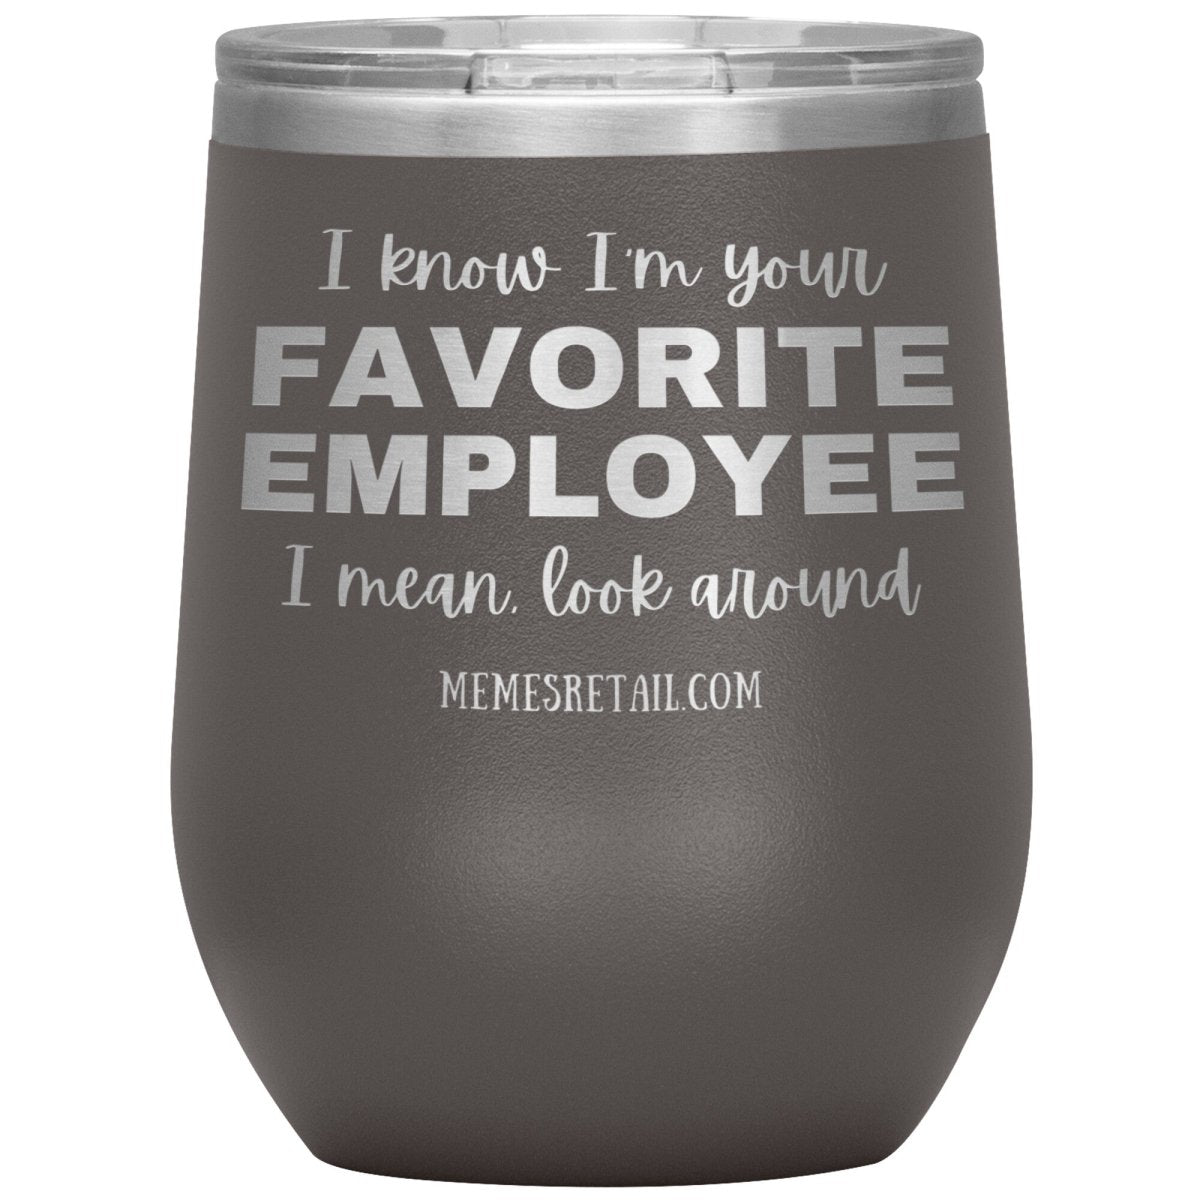 I know I’m your favorite employee, I mean look around, 12oz Wine Insulated Tumbler / Pewter - MemesRetail.com